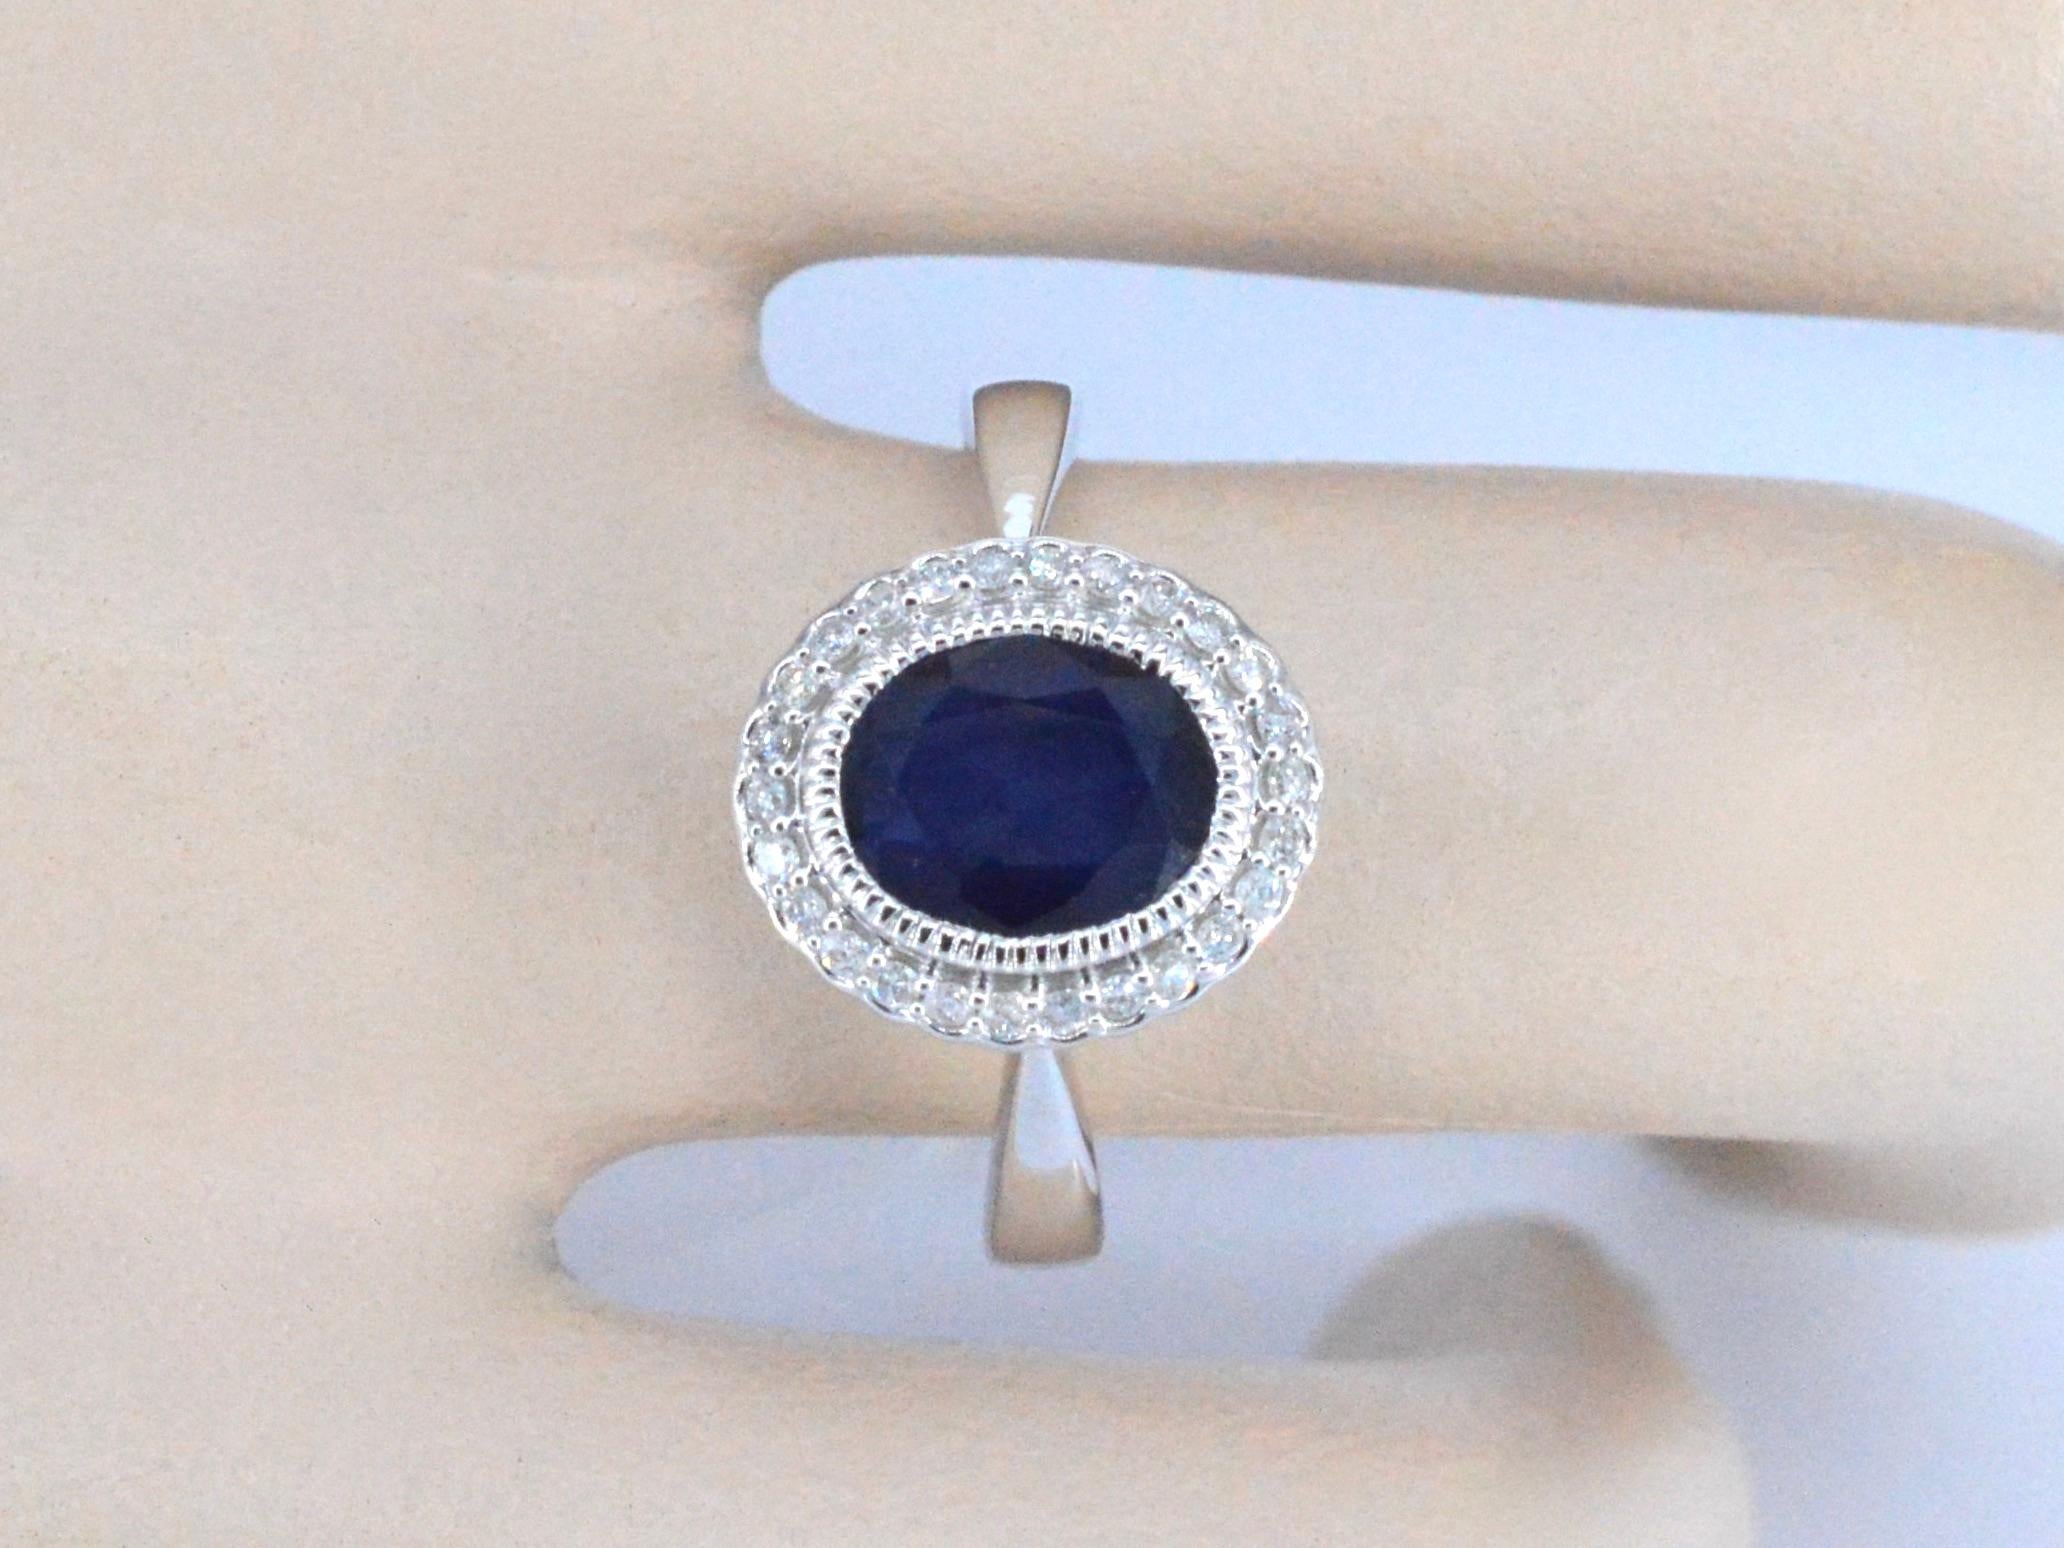 Introducing our stunning white gold entourage ring with diamonds and sapphire. This exquisite ring features a vibrant 3.00 carat oval cut sapphire, surrounded by 0.15 carats of brilliant cut diamonds. Crafted from 14 karat white gold and weighing